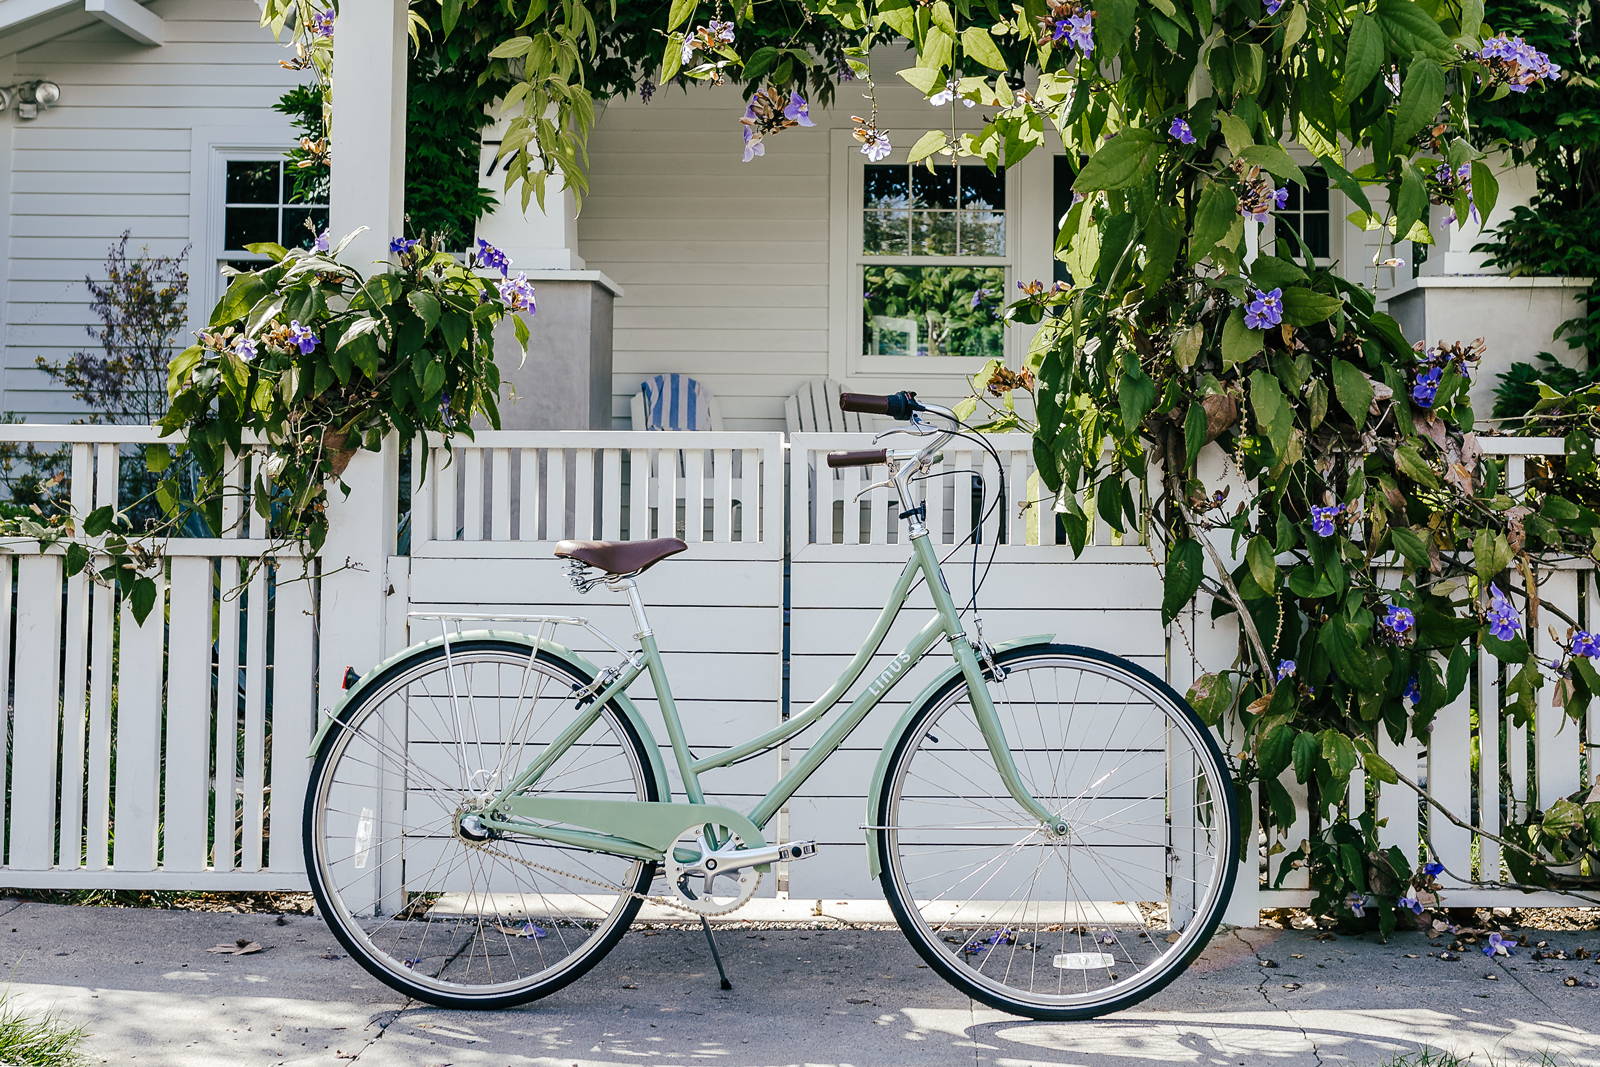 A Linus Dutchi bike in sage green sits against a garden gate surrounded by purple flowers.